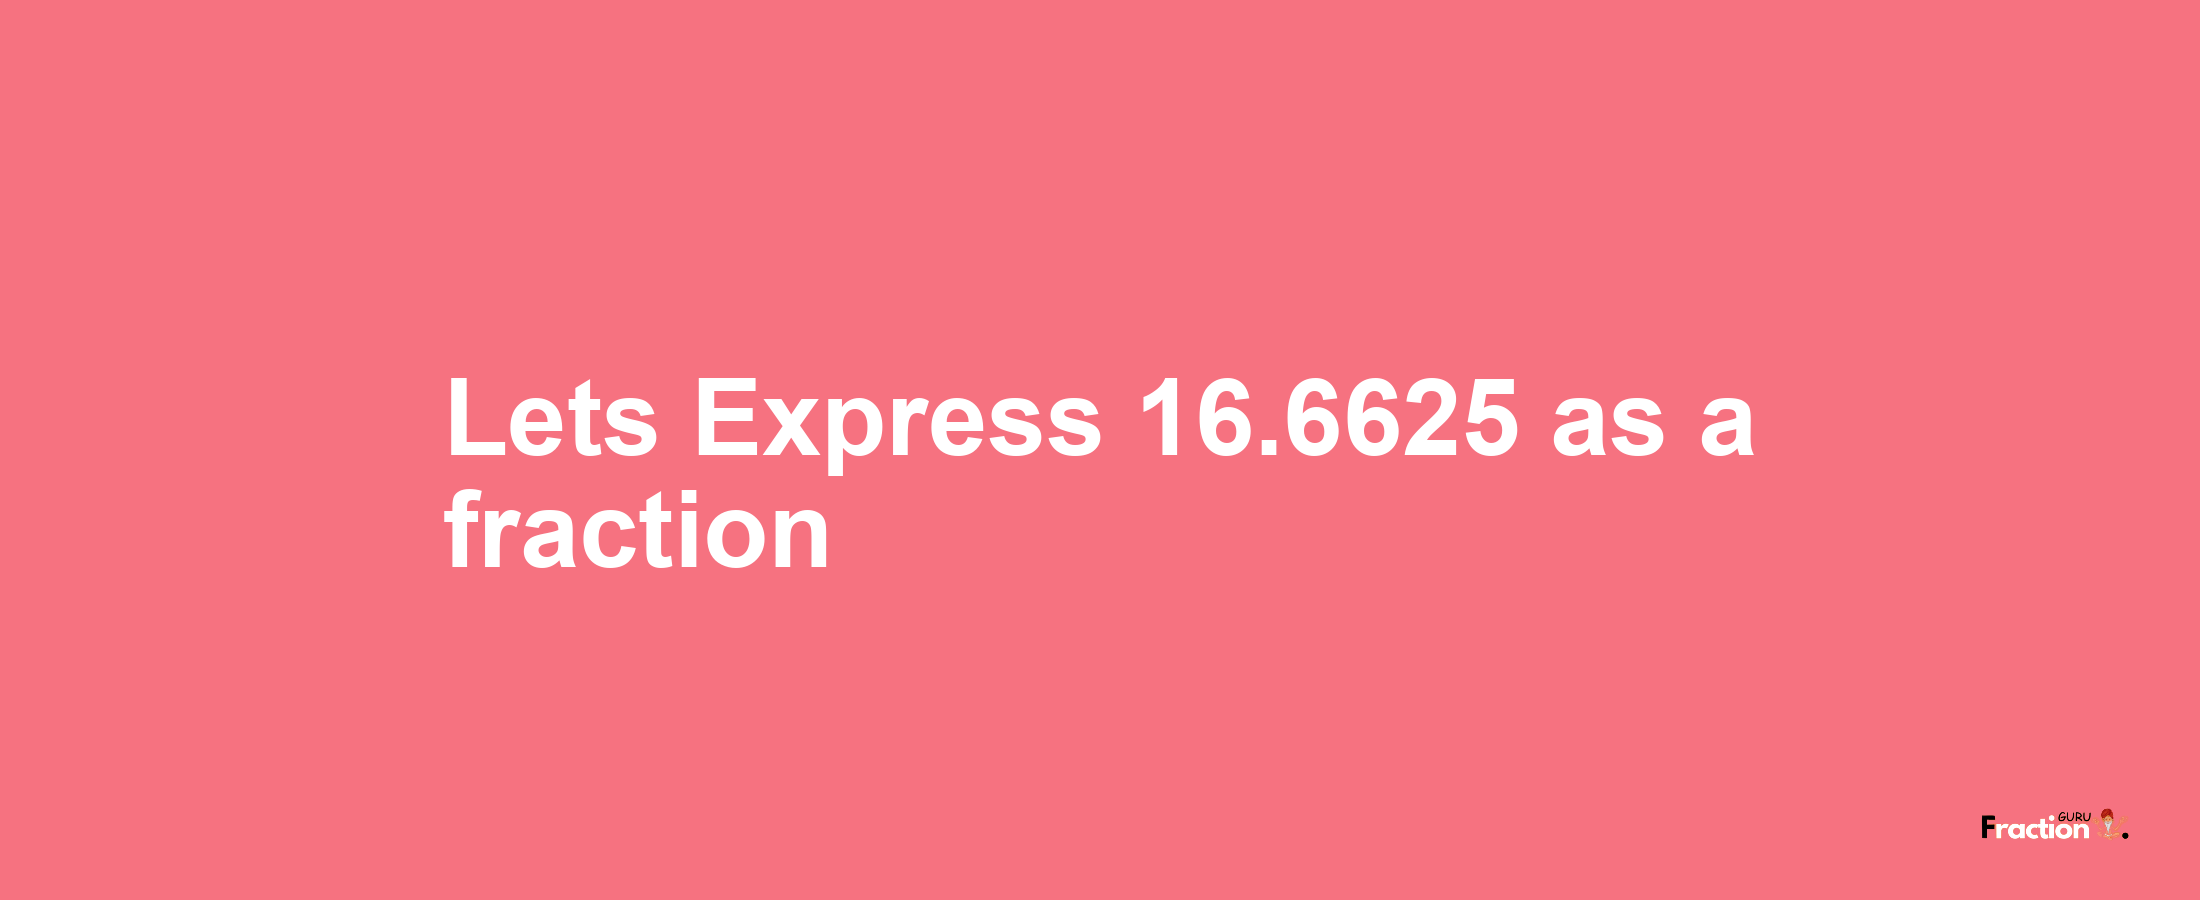 Lets Express 16.6625 as afraction